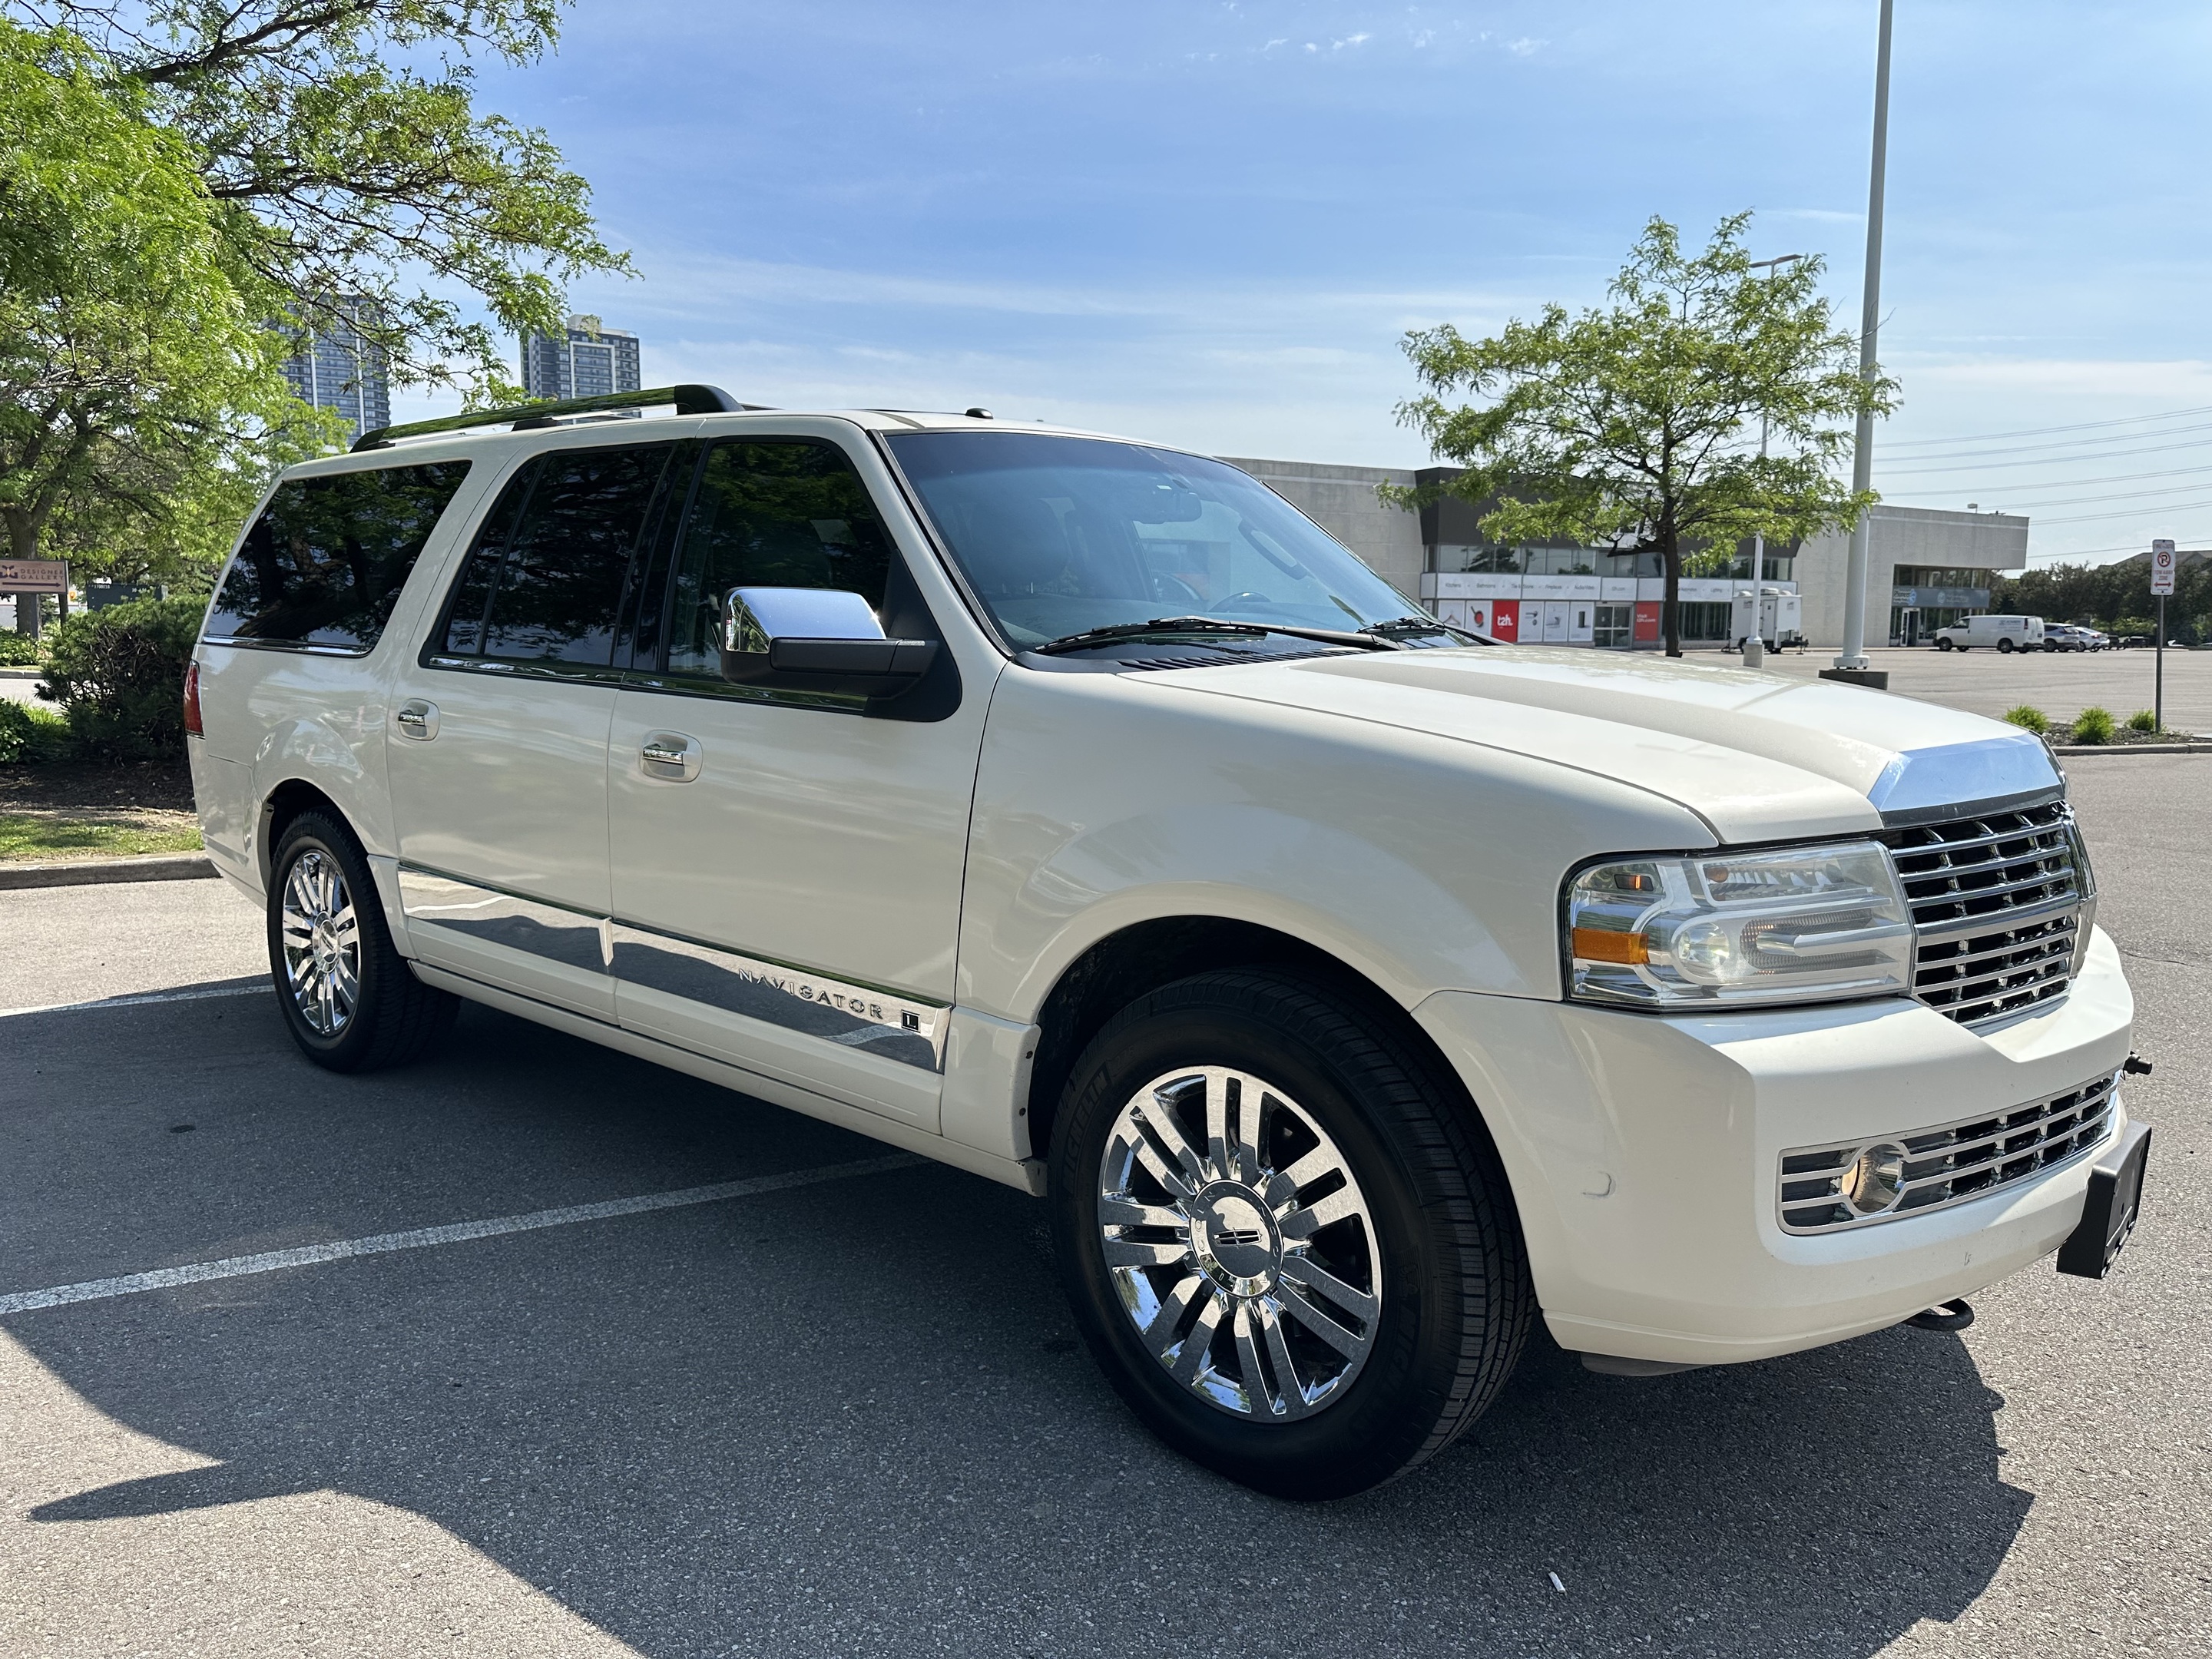 2008 Lincoln Navigator | 4WD | Ultimate | 7 Passengers | Extended | 